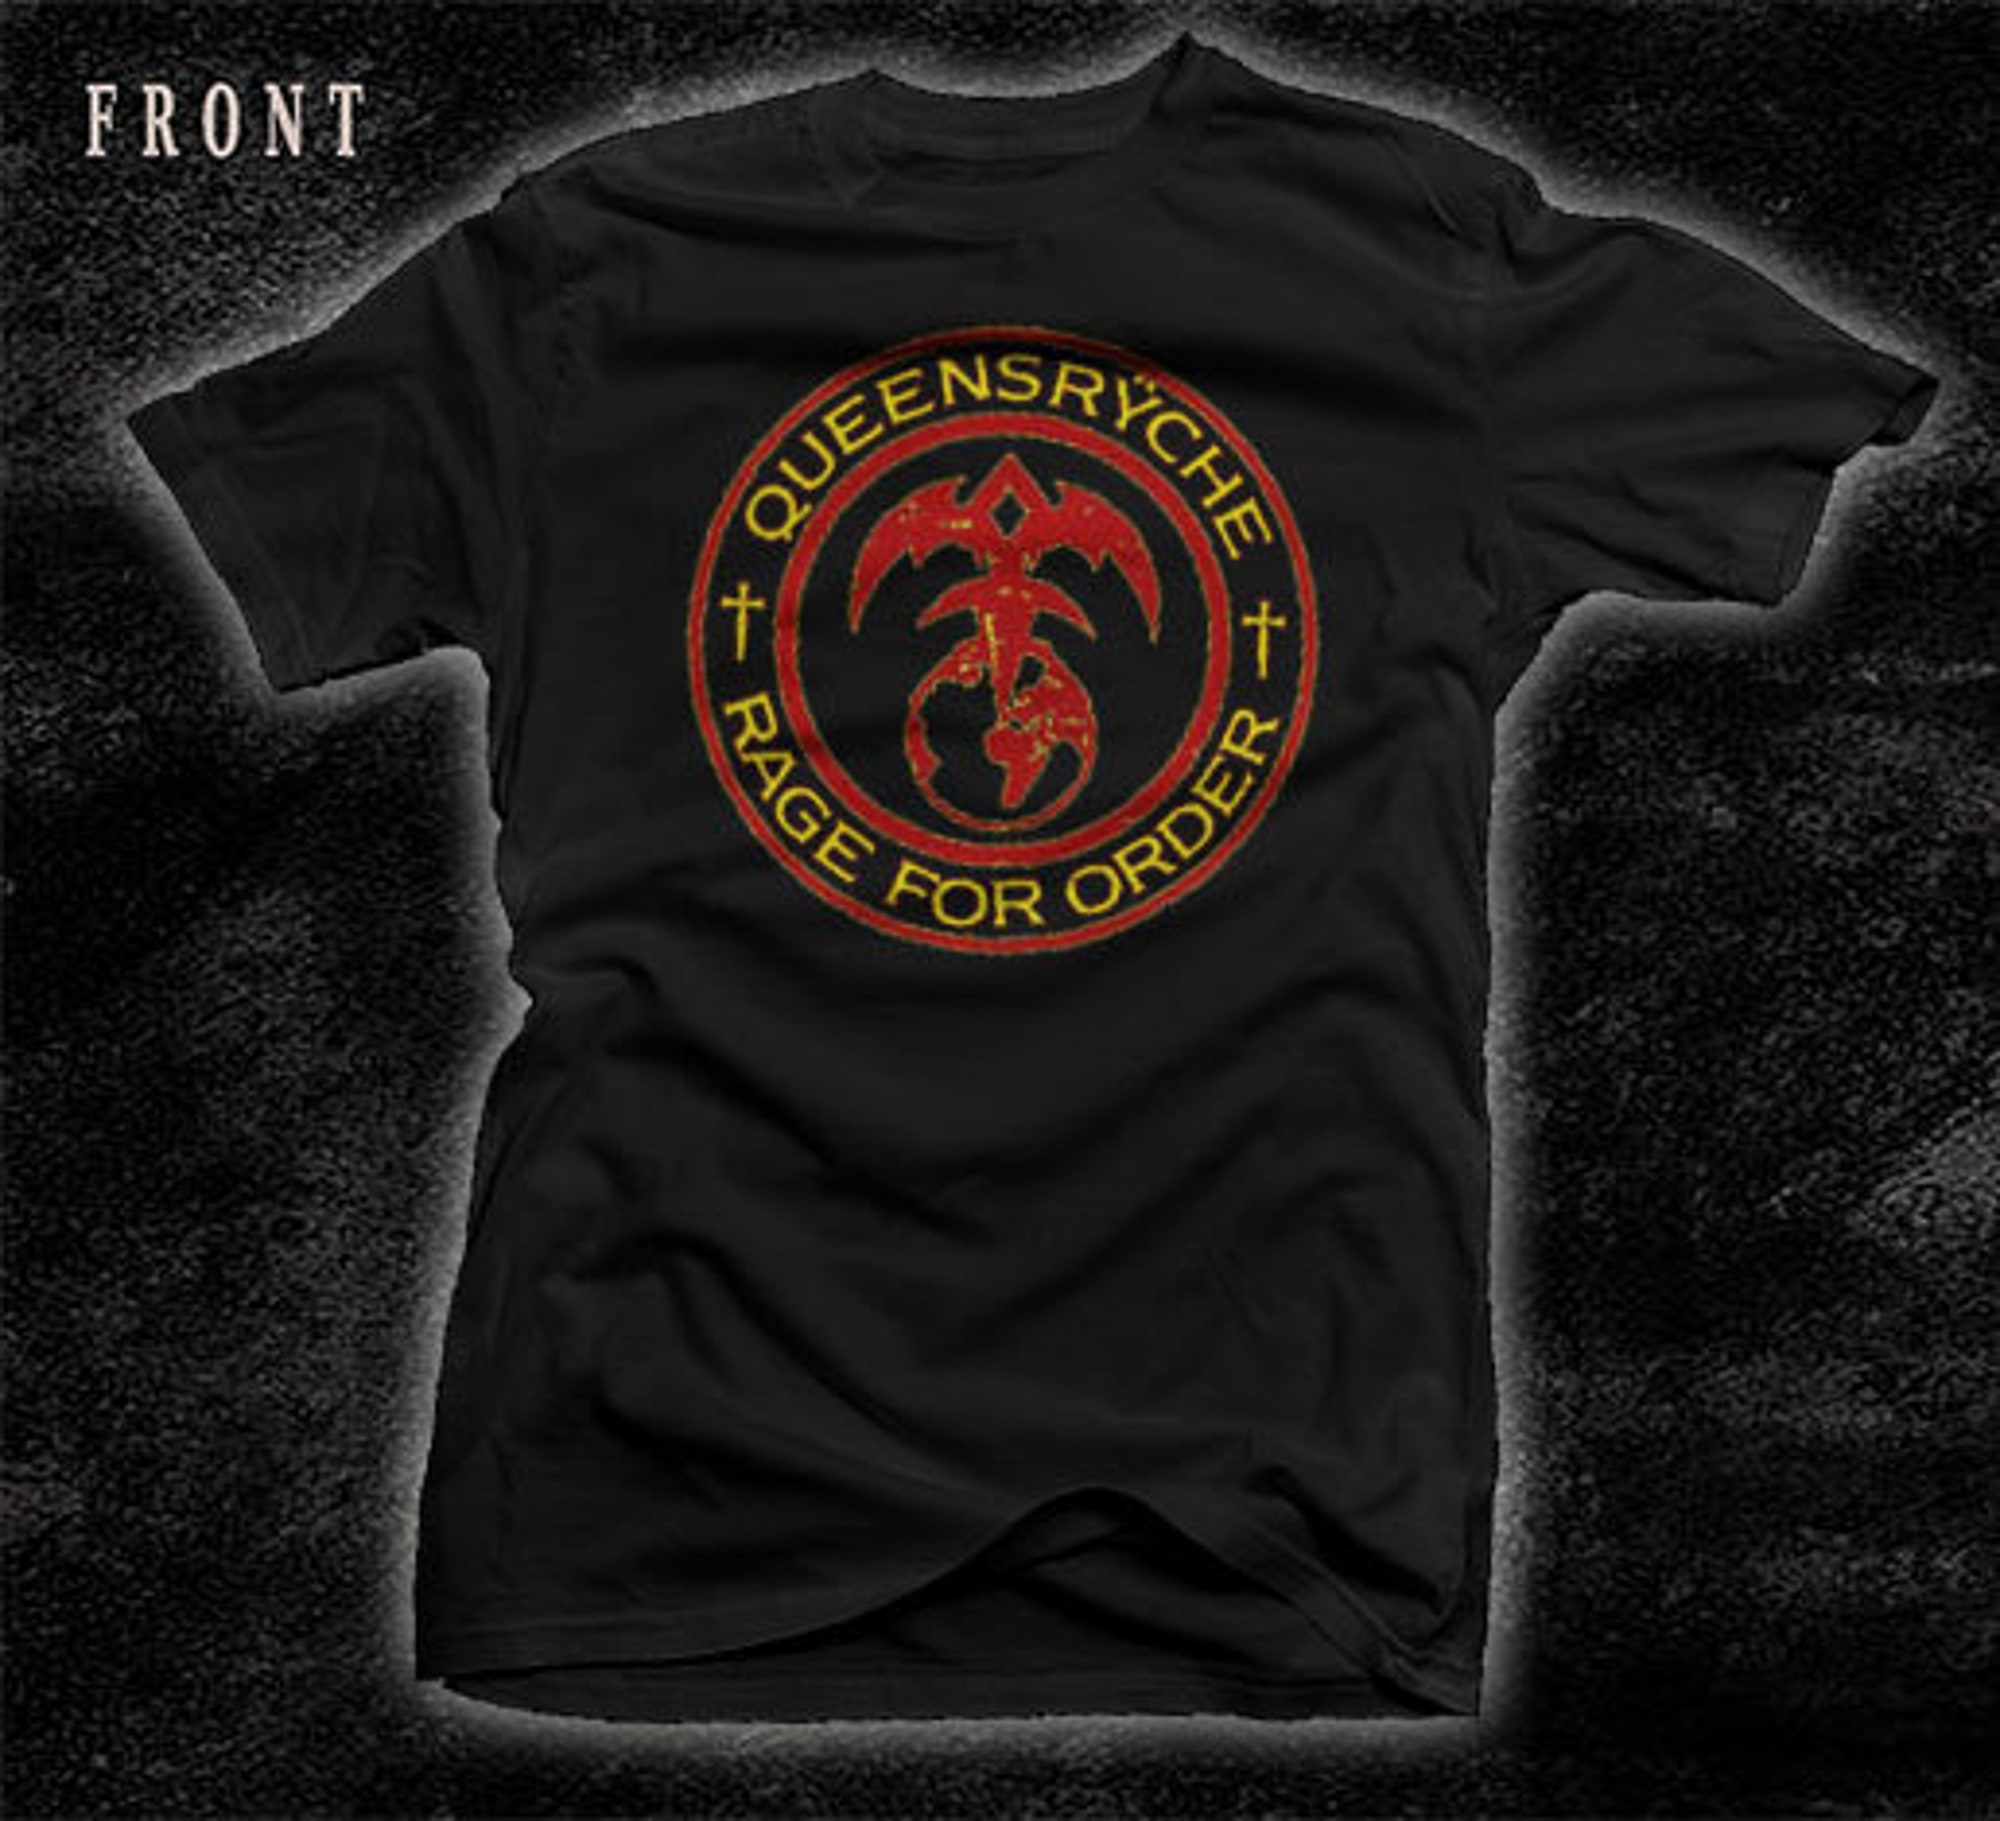 QUEENSRYCHE -Rage for Order t-shirt